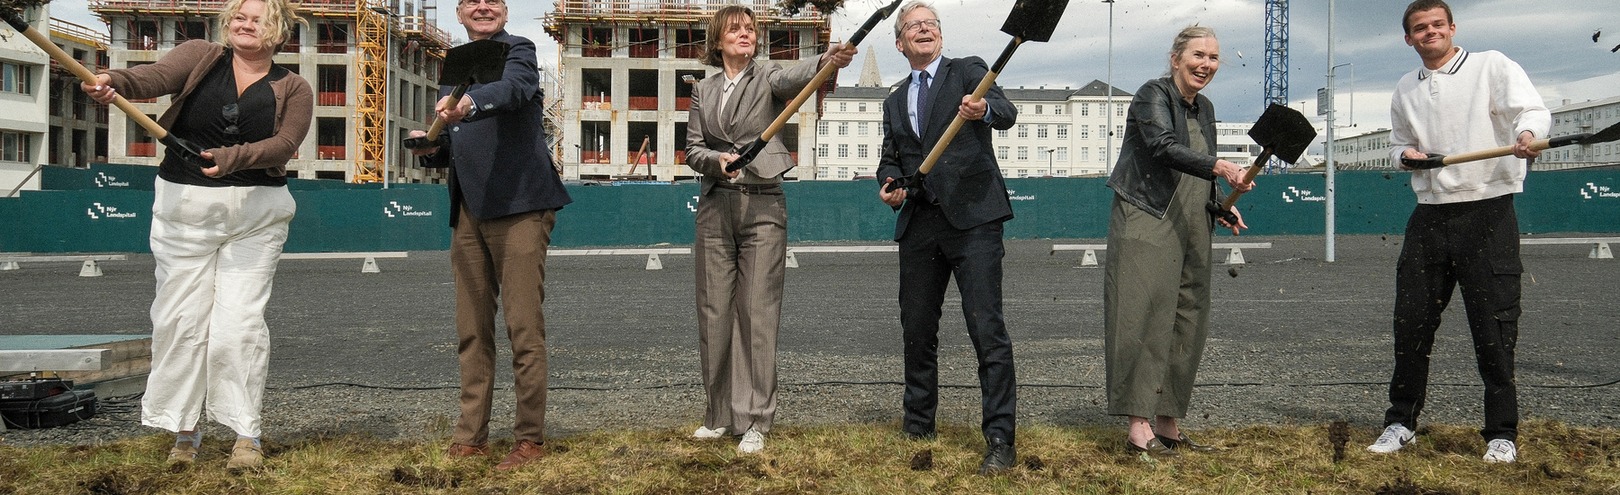 Breaking ground for a new health science building - Available at University of Iceland